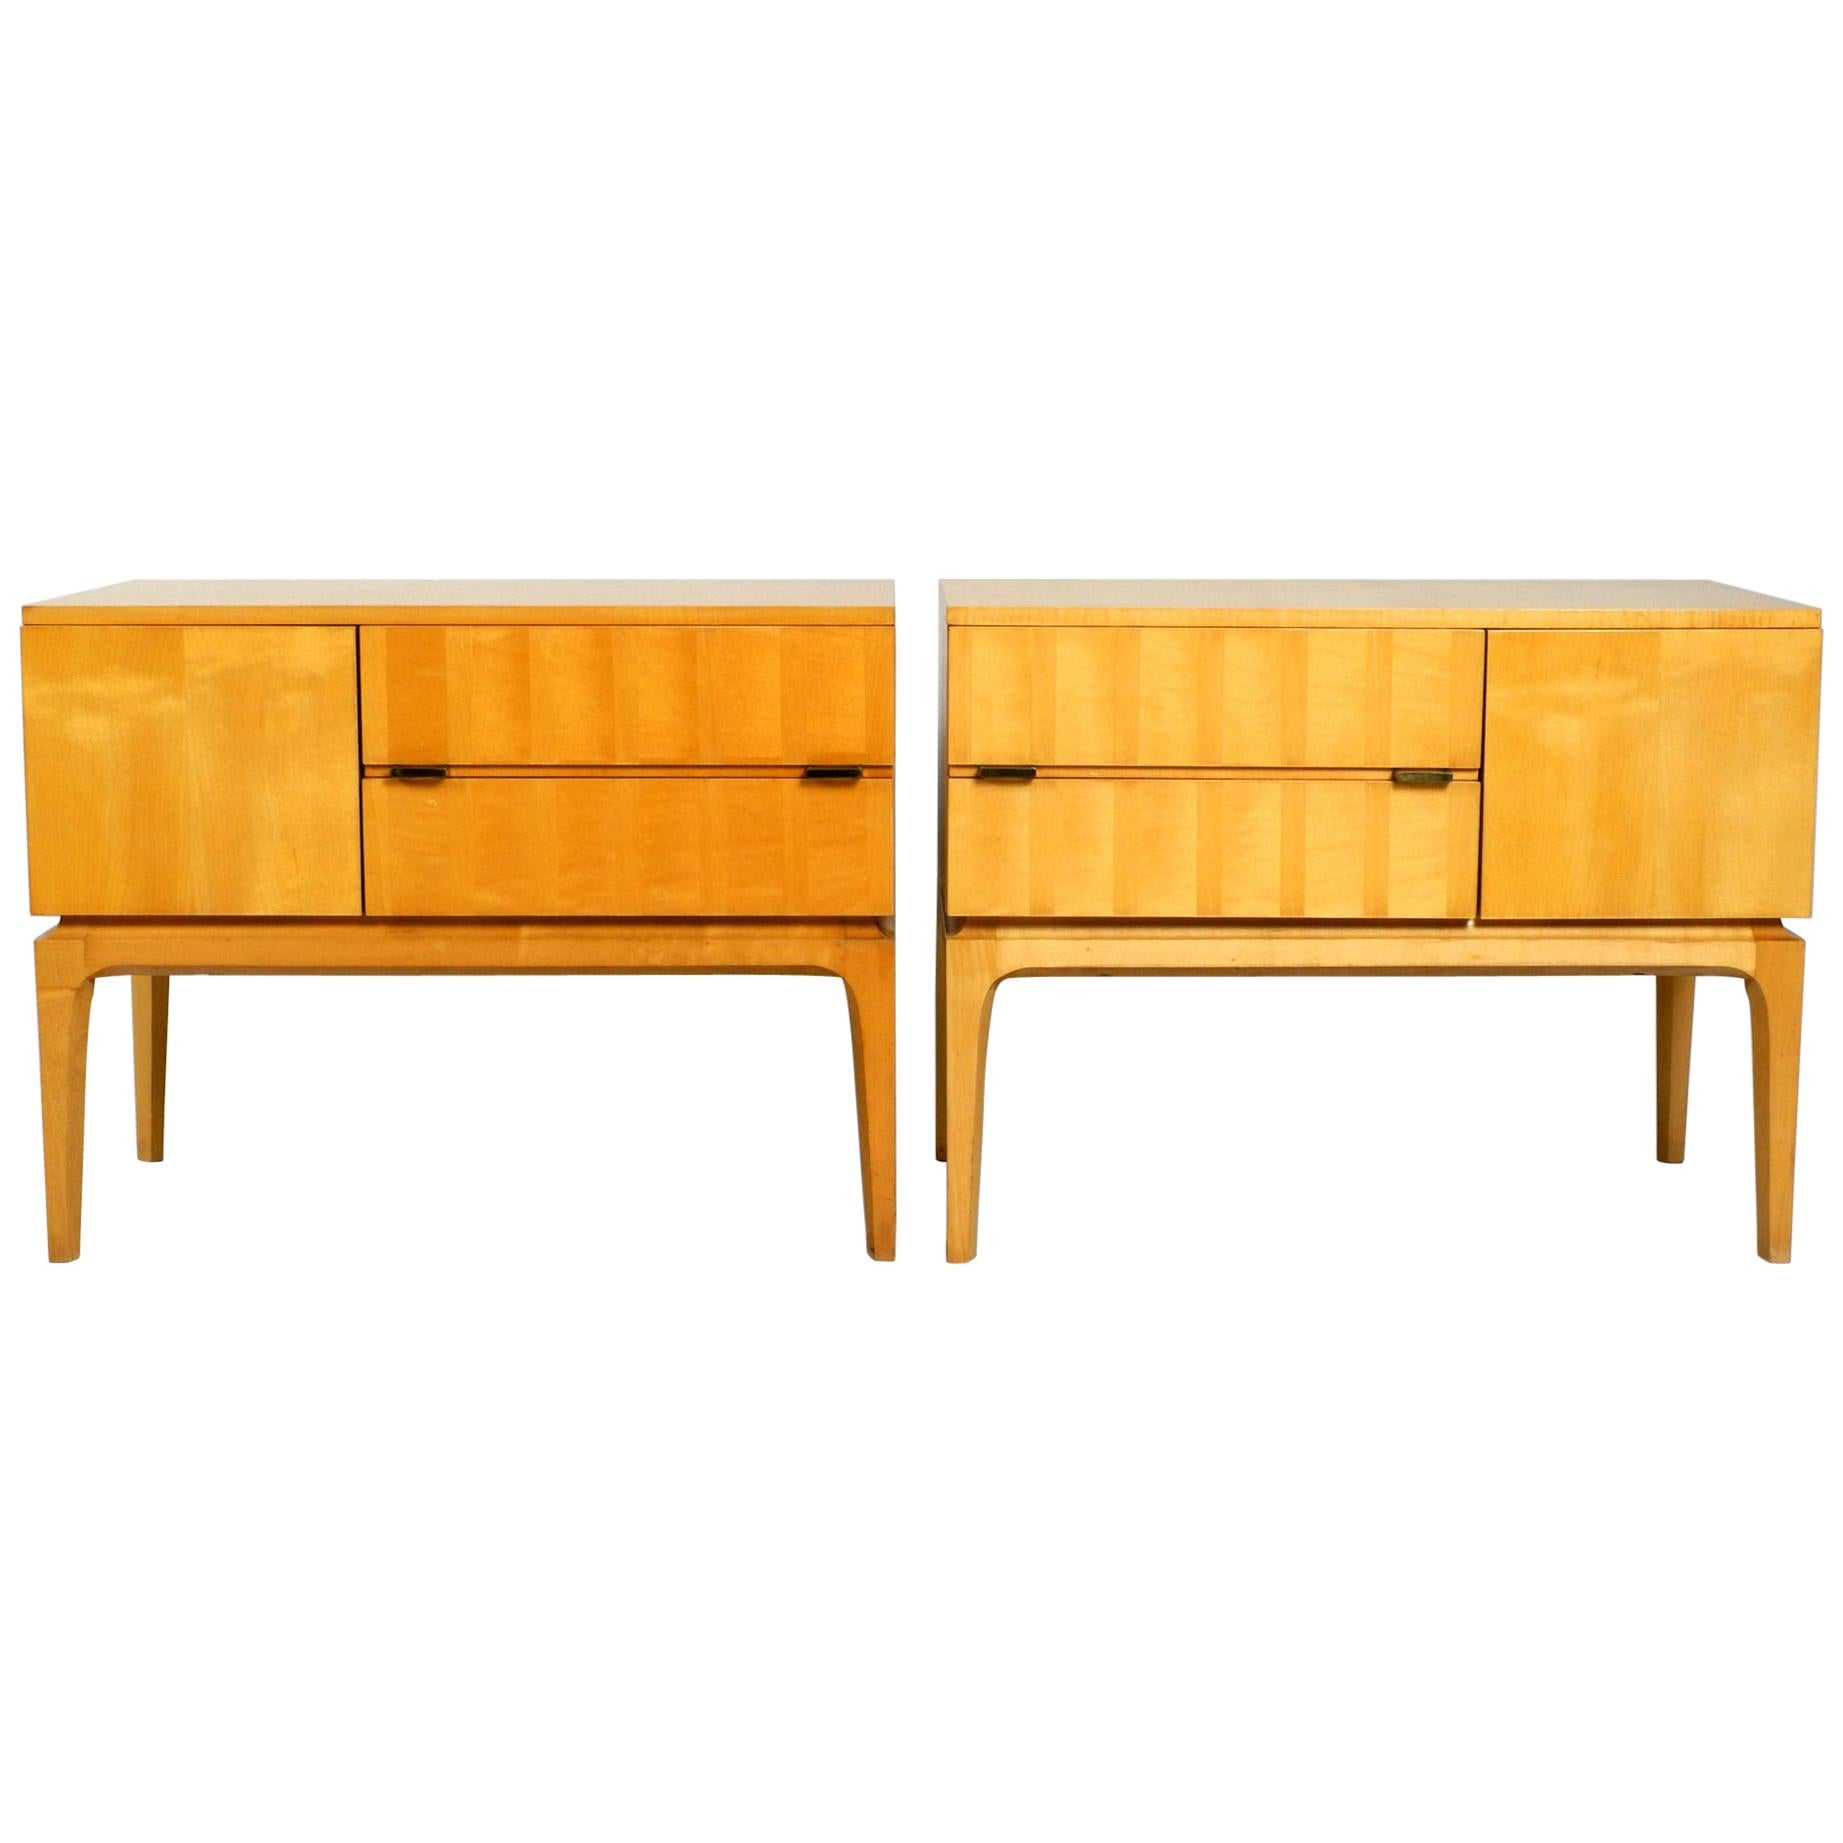 2 Midcentury Nightstands Made of Maple Wood with Clear Varnish Unused Condition